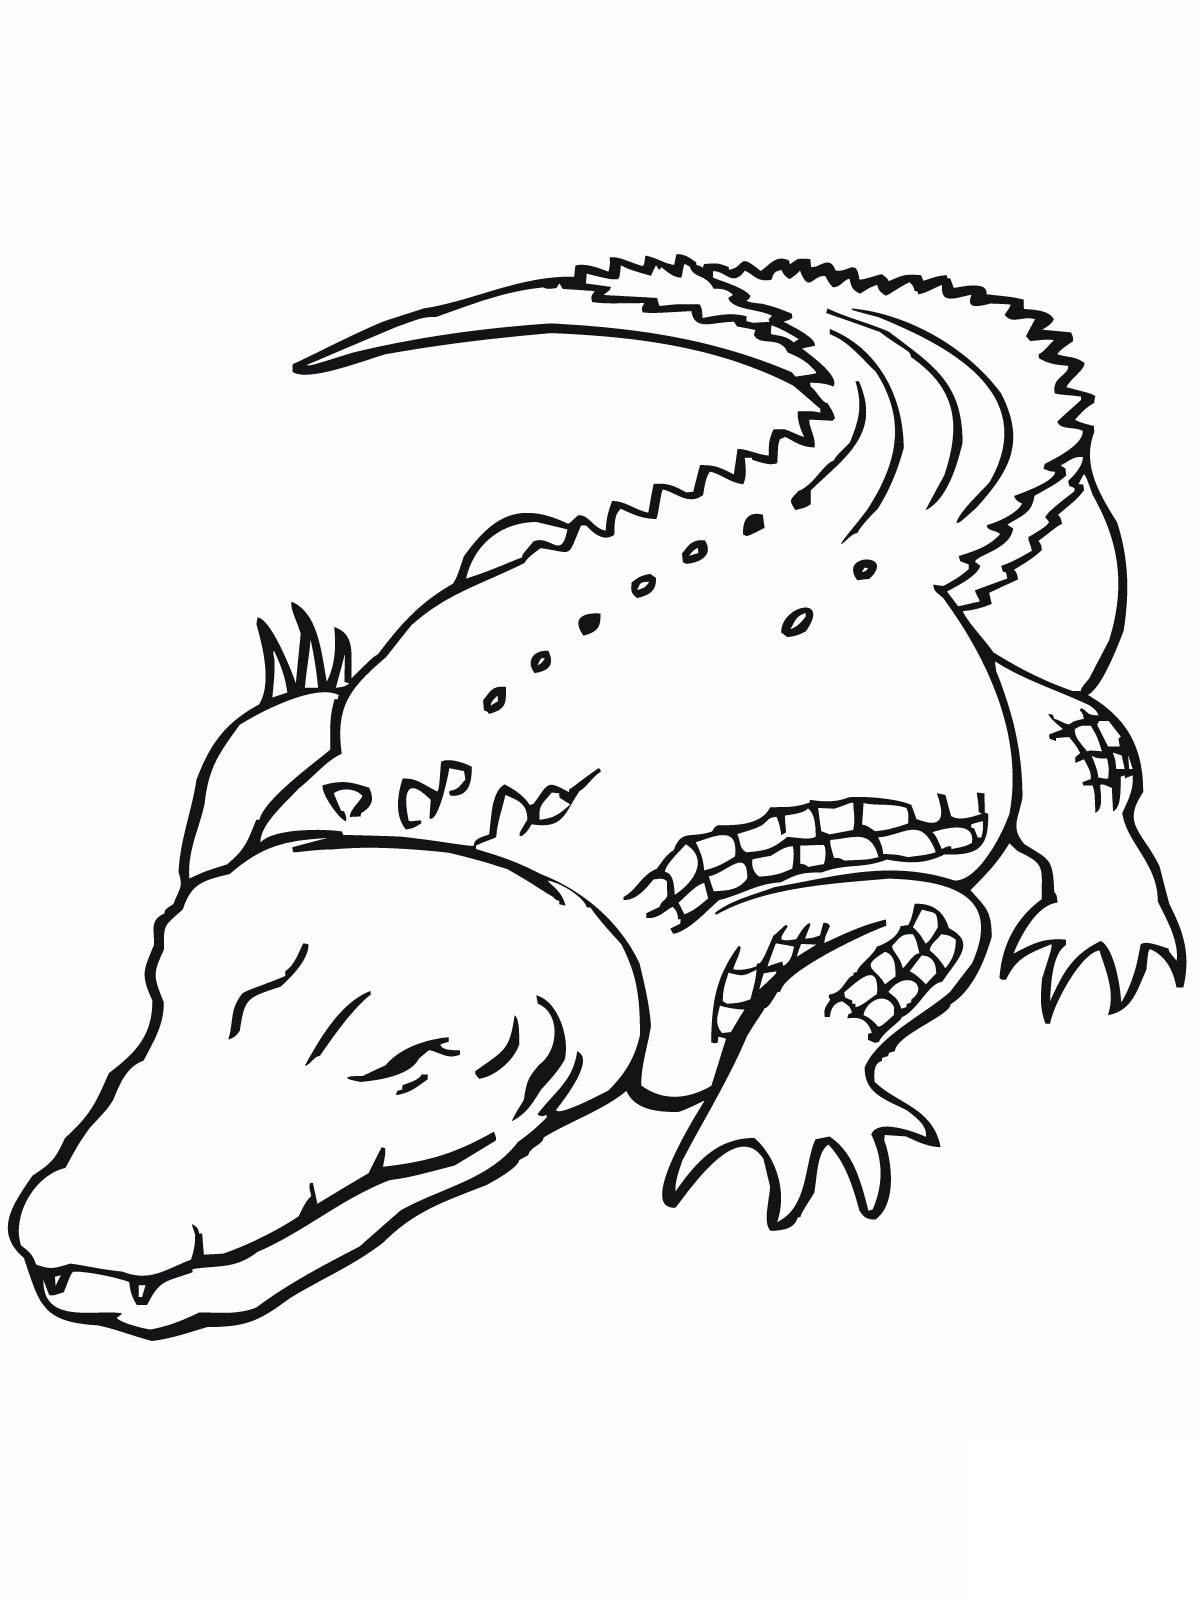 Alligator Coloring Pages
 Free Printable Crocodile Coloring Pages For Kids